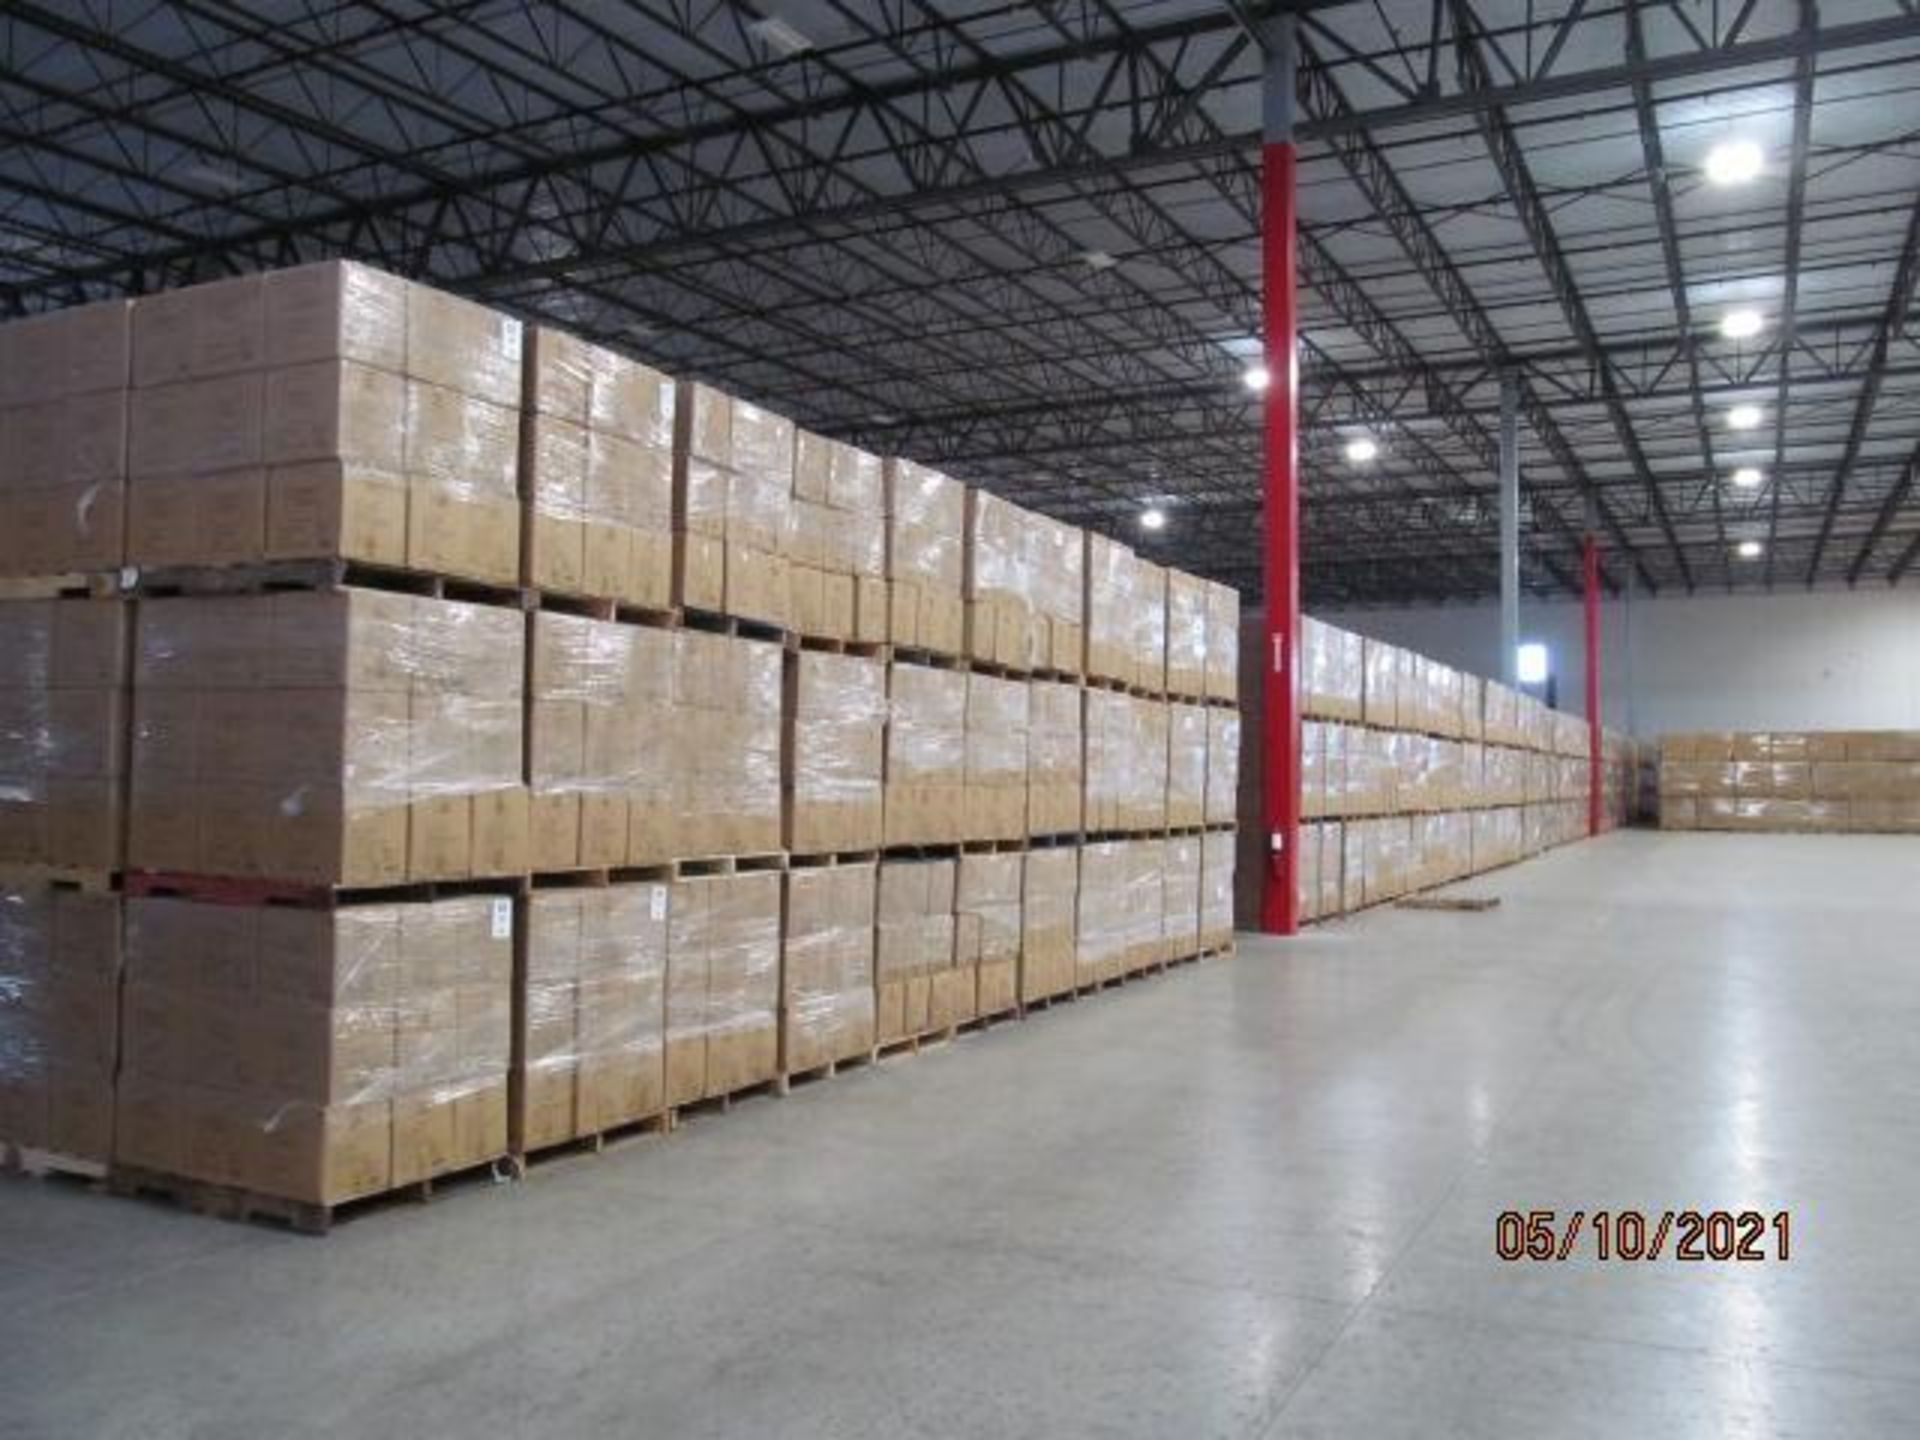 Lot of Waxman Kleen Freak Sanitizing Wipes consisting of 269,568 packages on 416 pallets. Each packa - Image 8 of 11